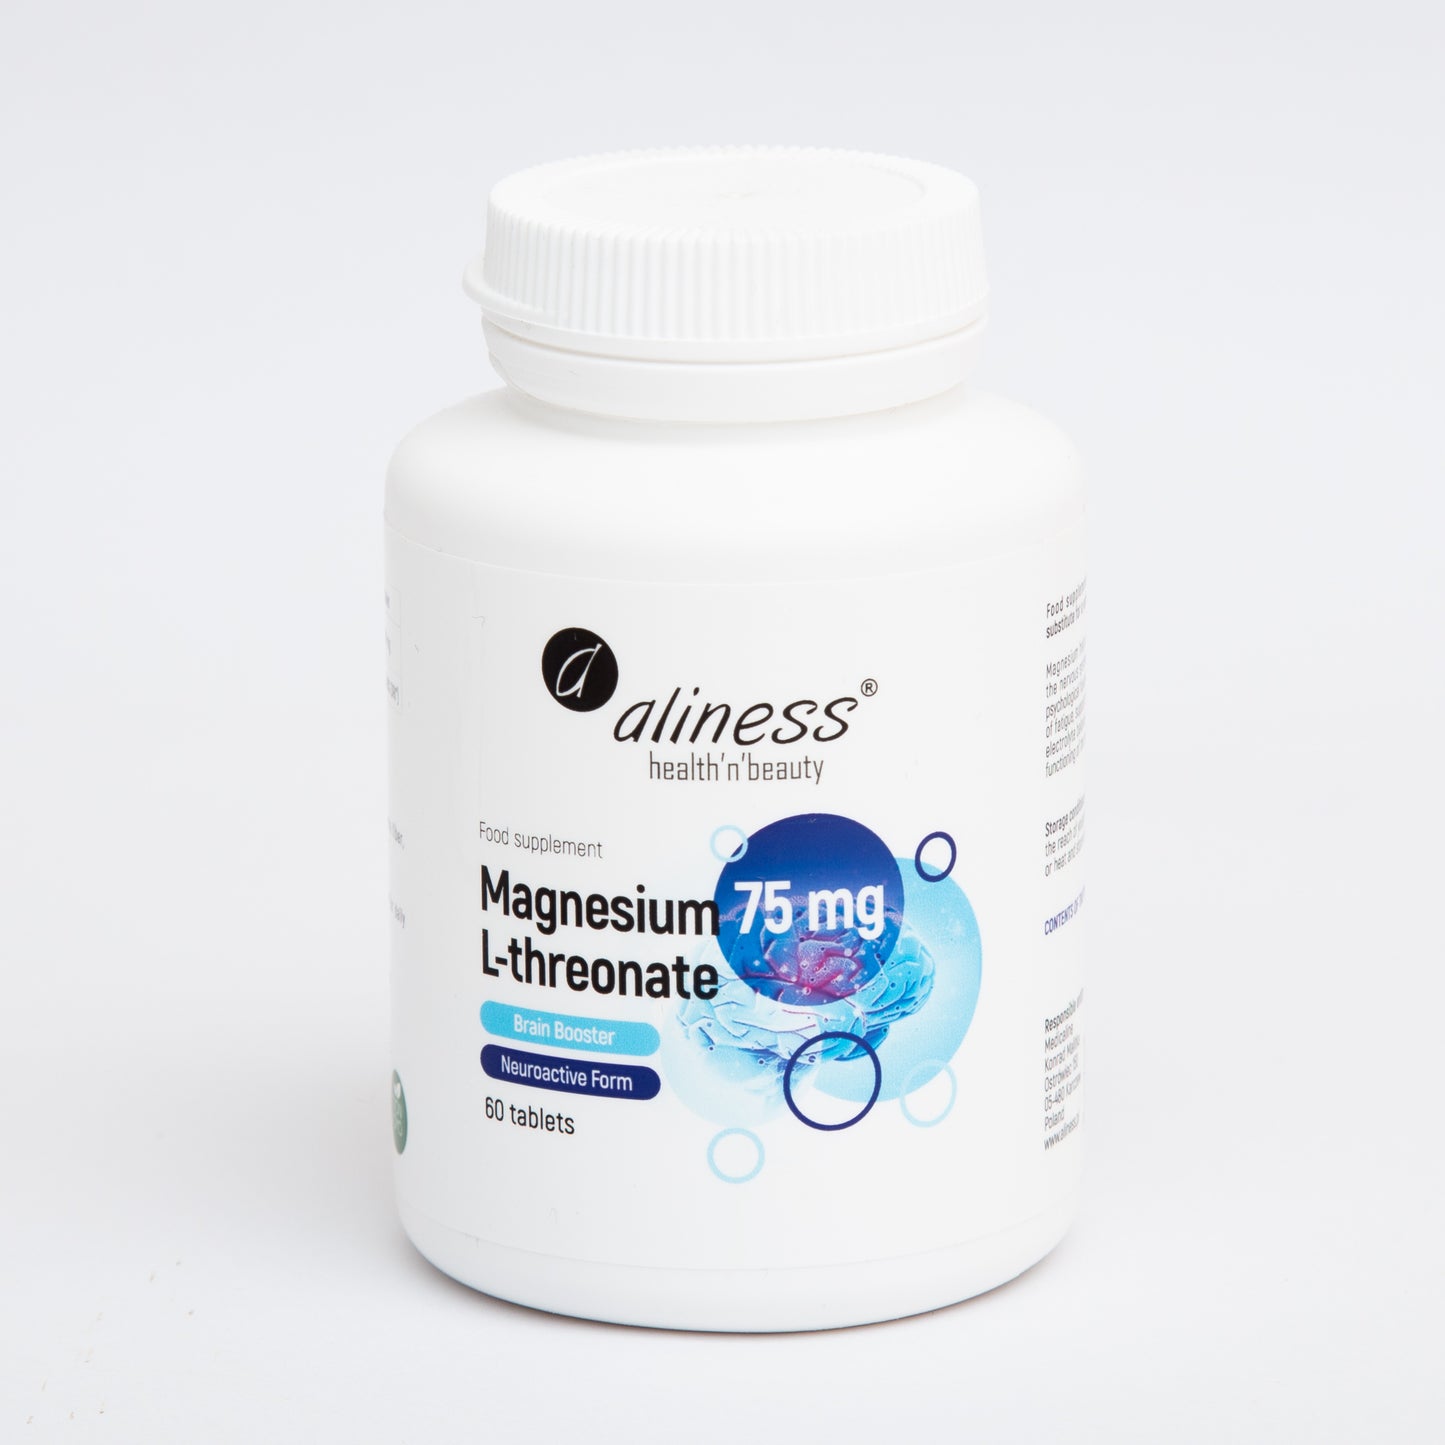 60 tablets of Magnesium L-Threonate 2100mg, 1 month supply, Brain Booster, Magnesium L-Threonate